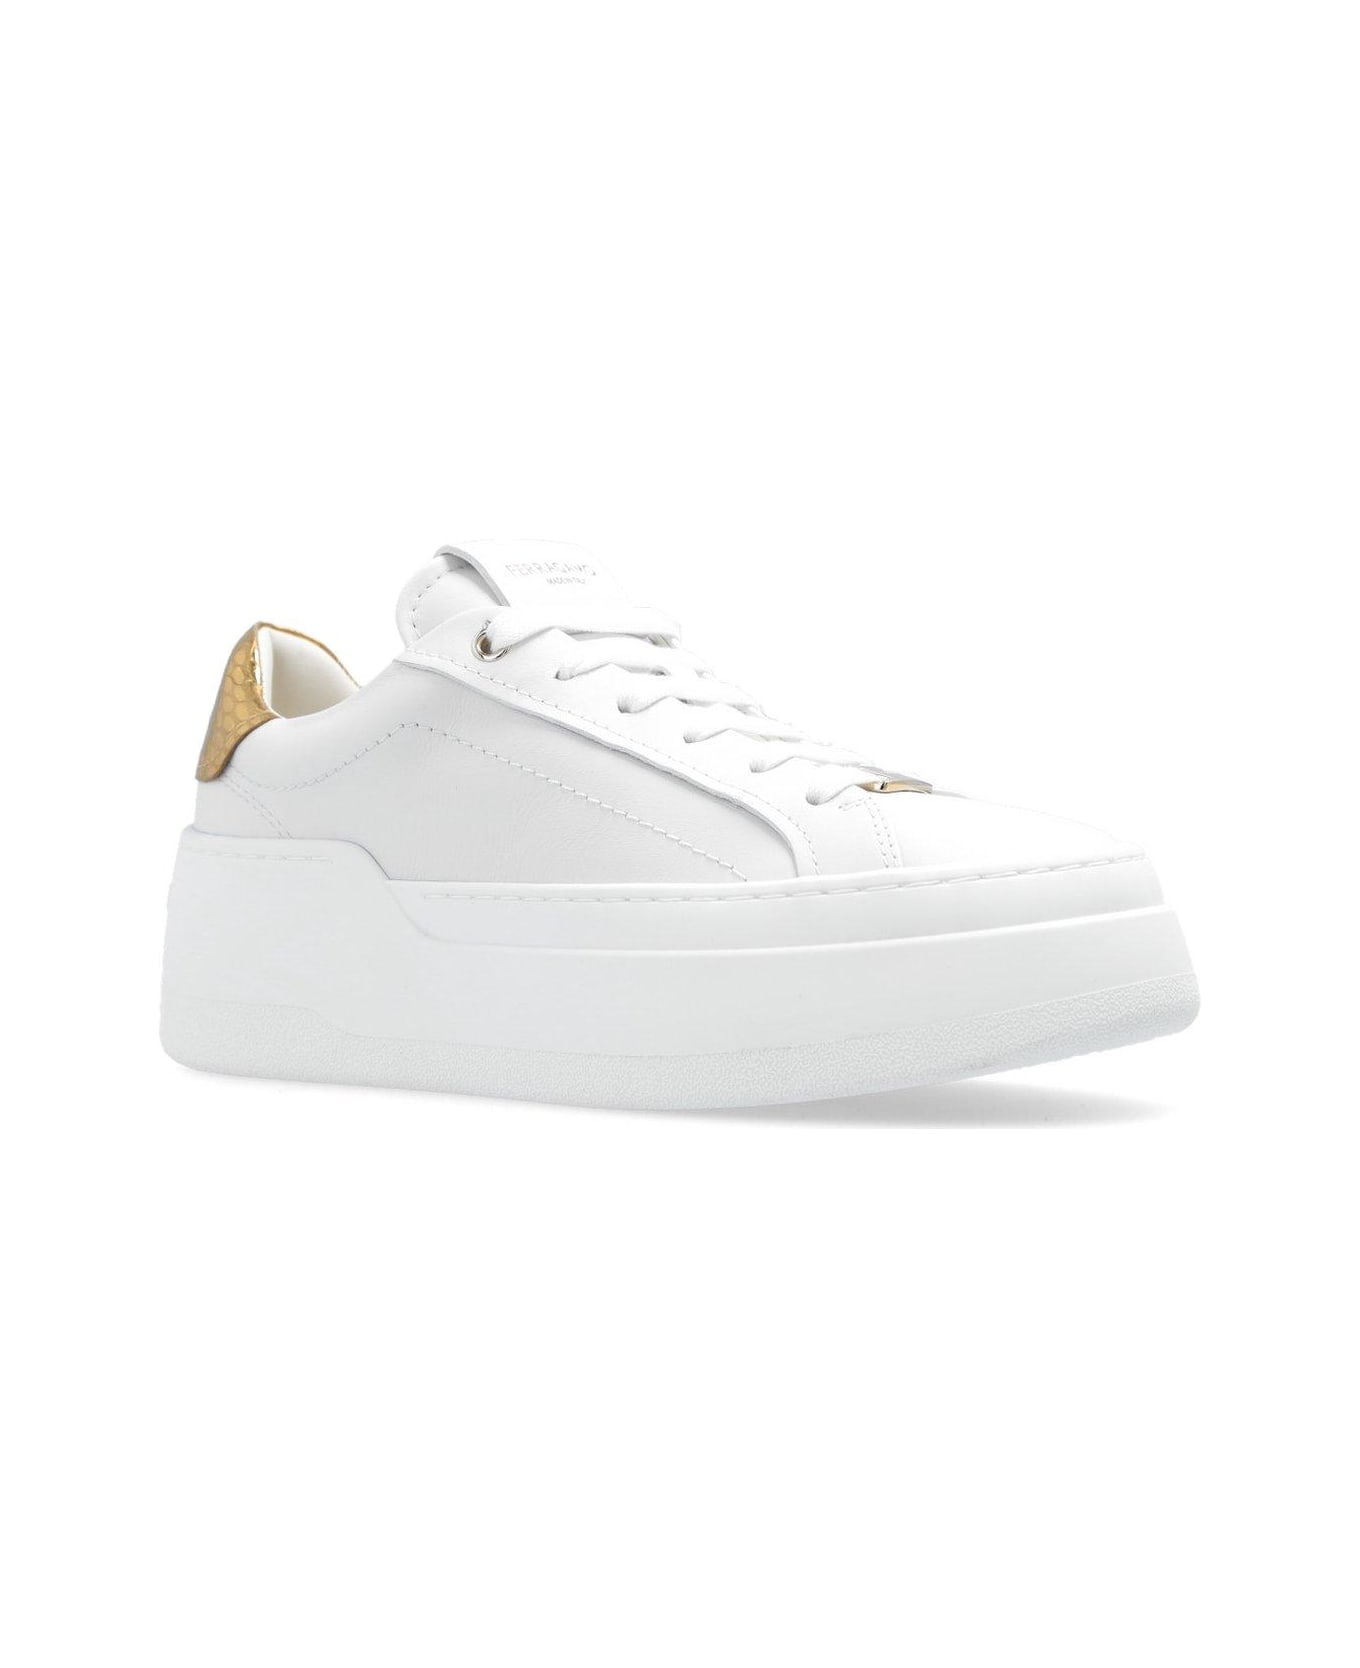 Ferragamo Lace-up Wedge Sneakers - White スニーカー